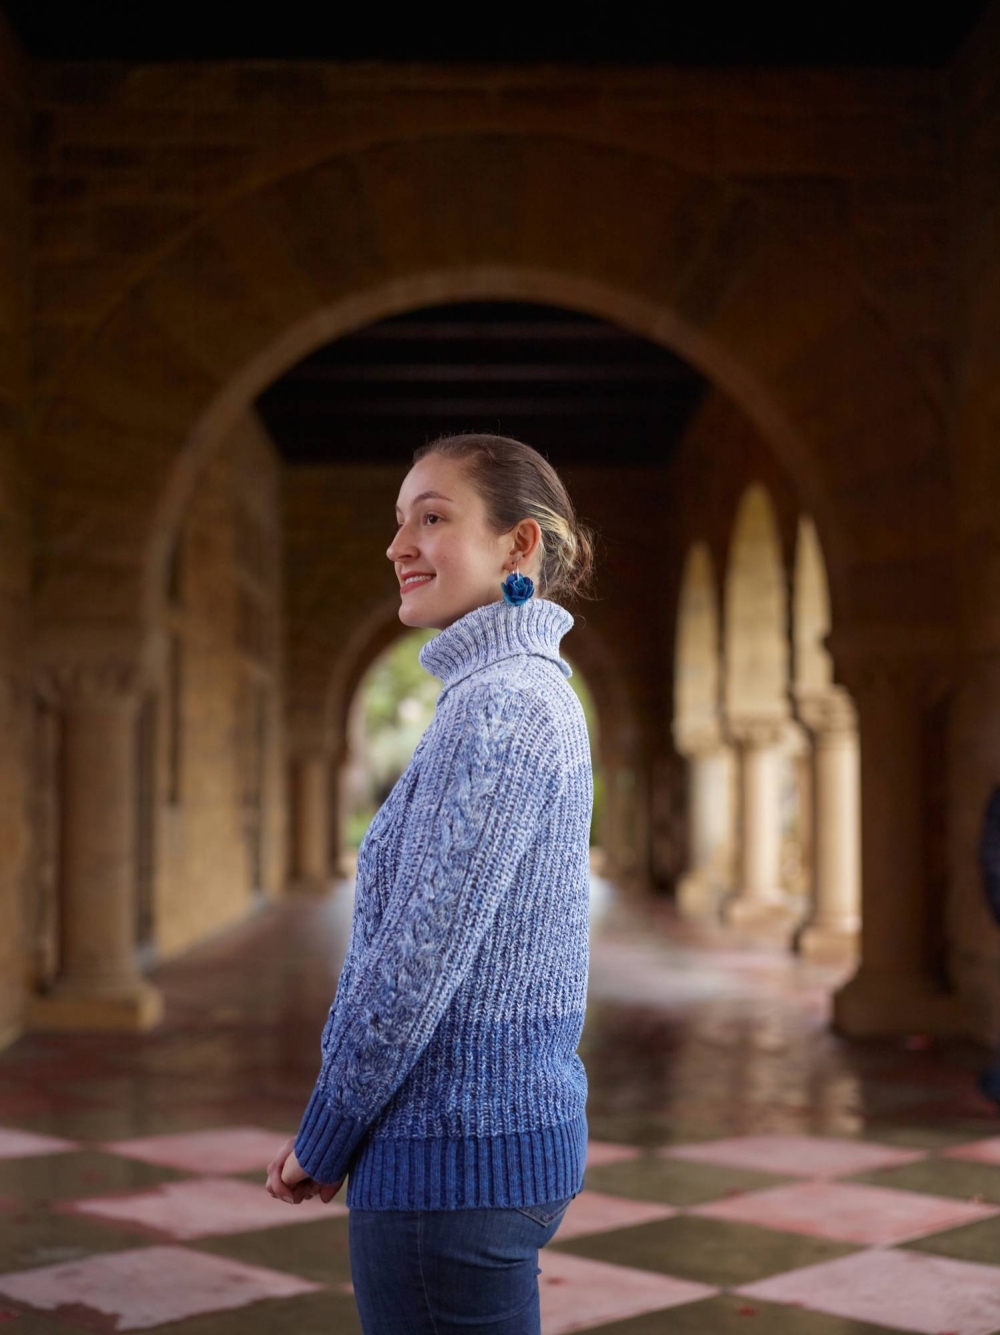 Rebecca Grekin, a Ph.D. candidate, on the Stanford University campus on Dec. 18.